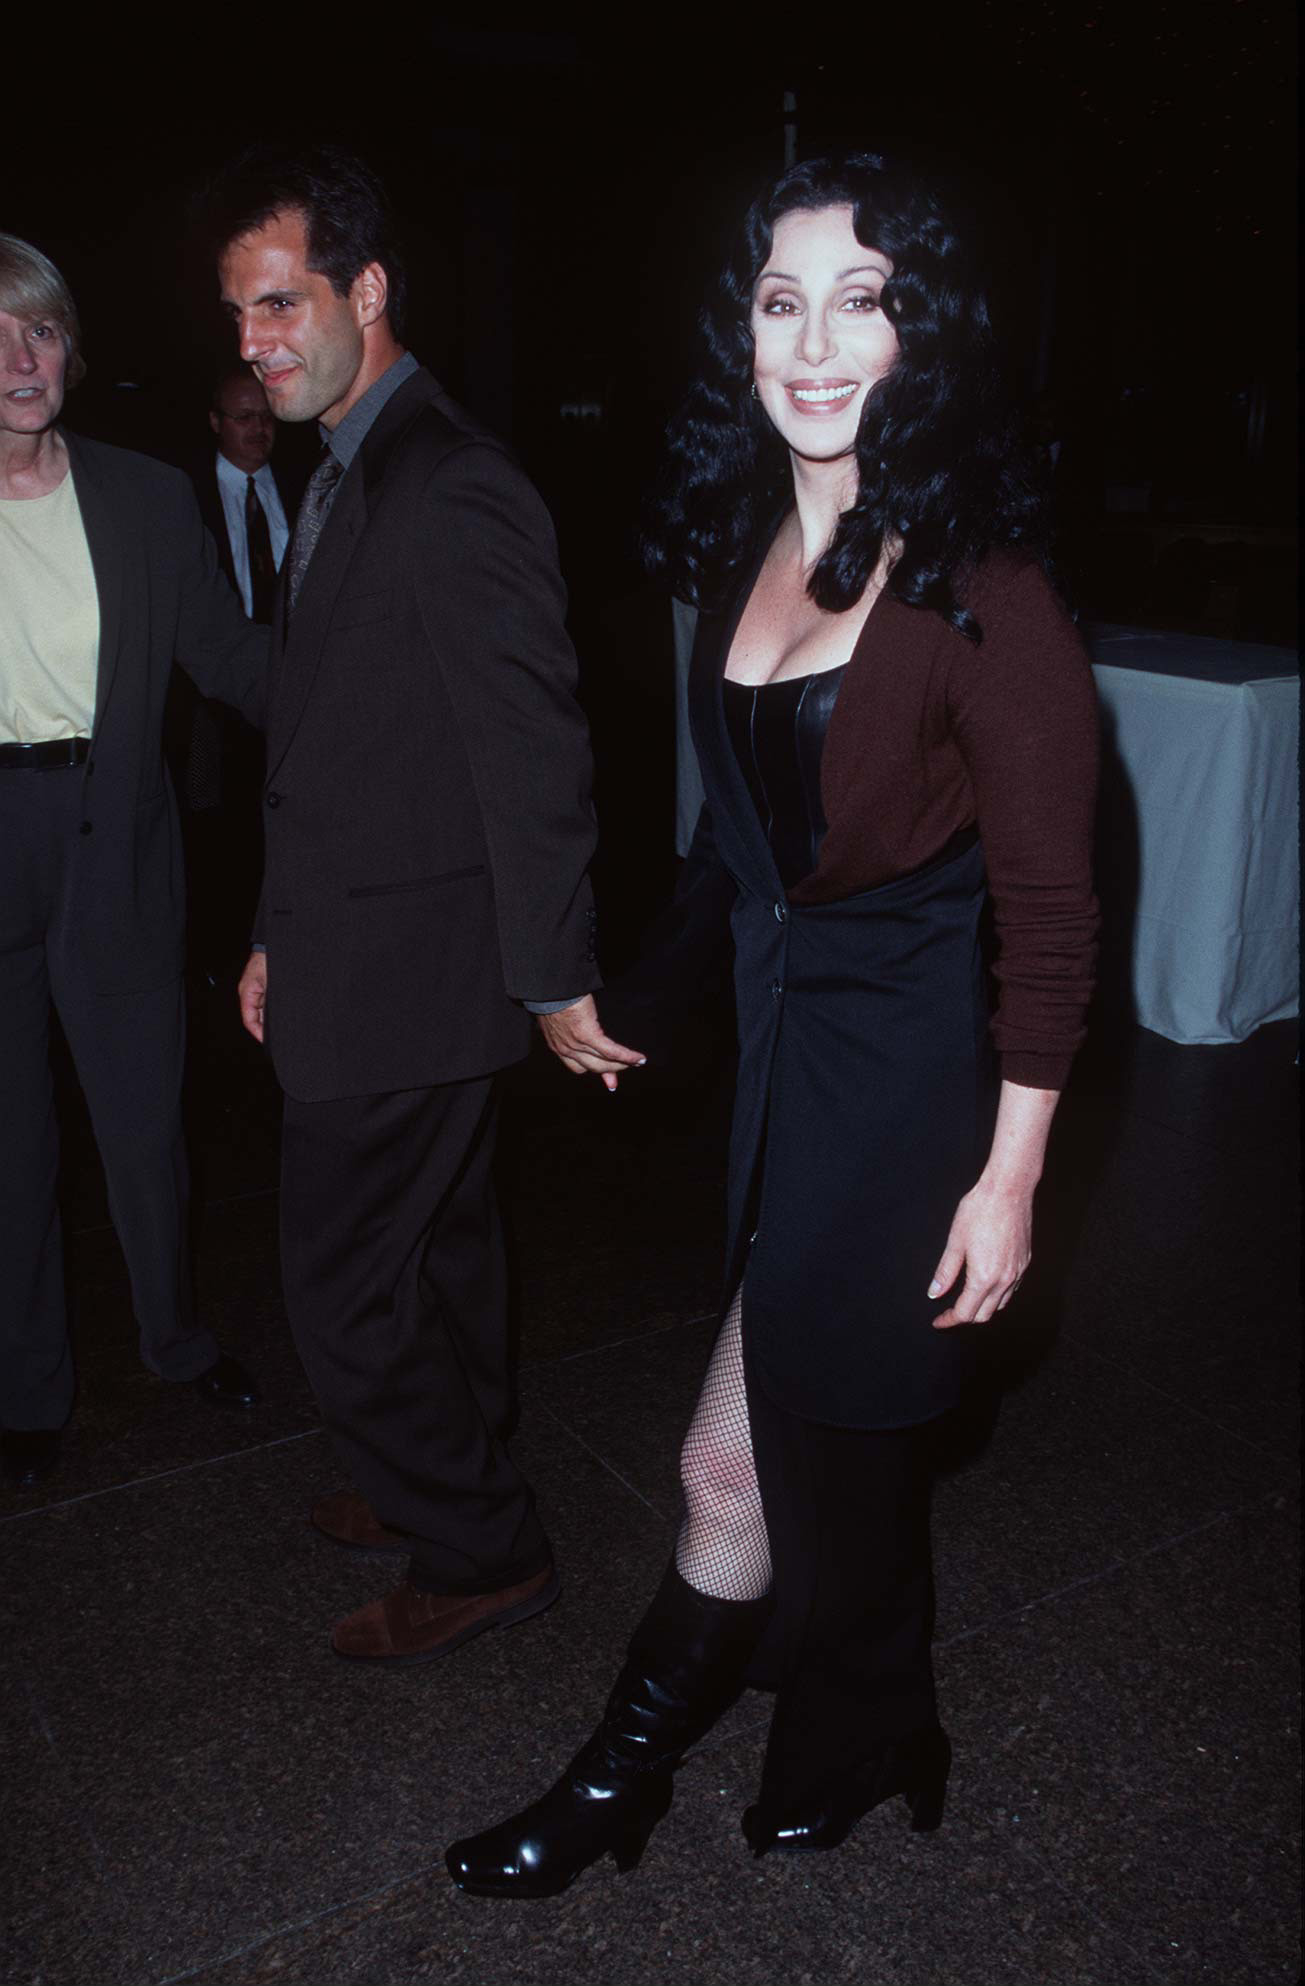 Cher in a black dress and boots, smiling as she walks with a male companion at an event